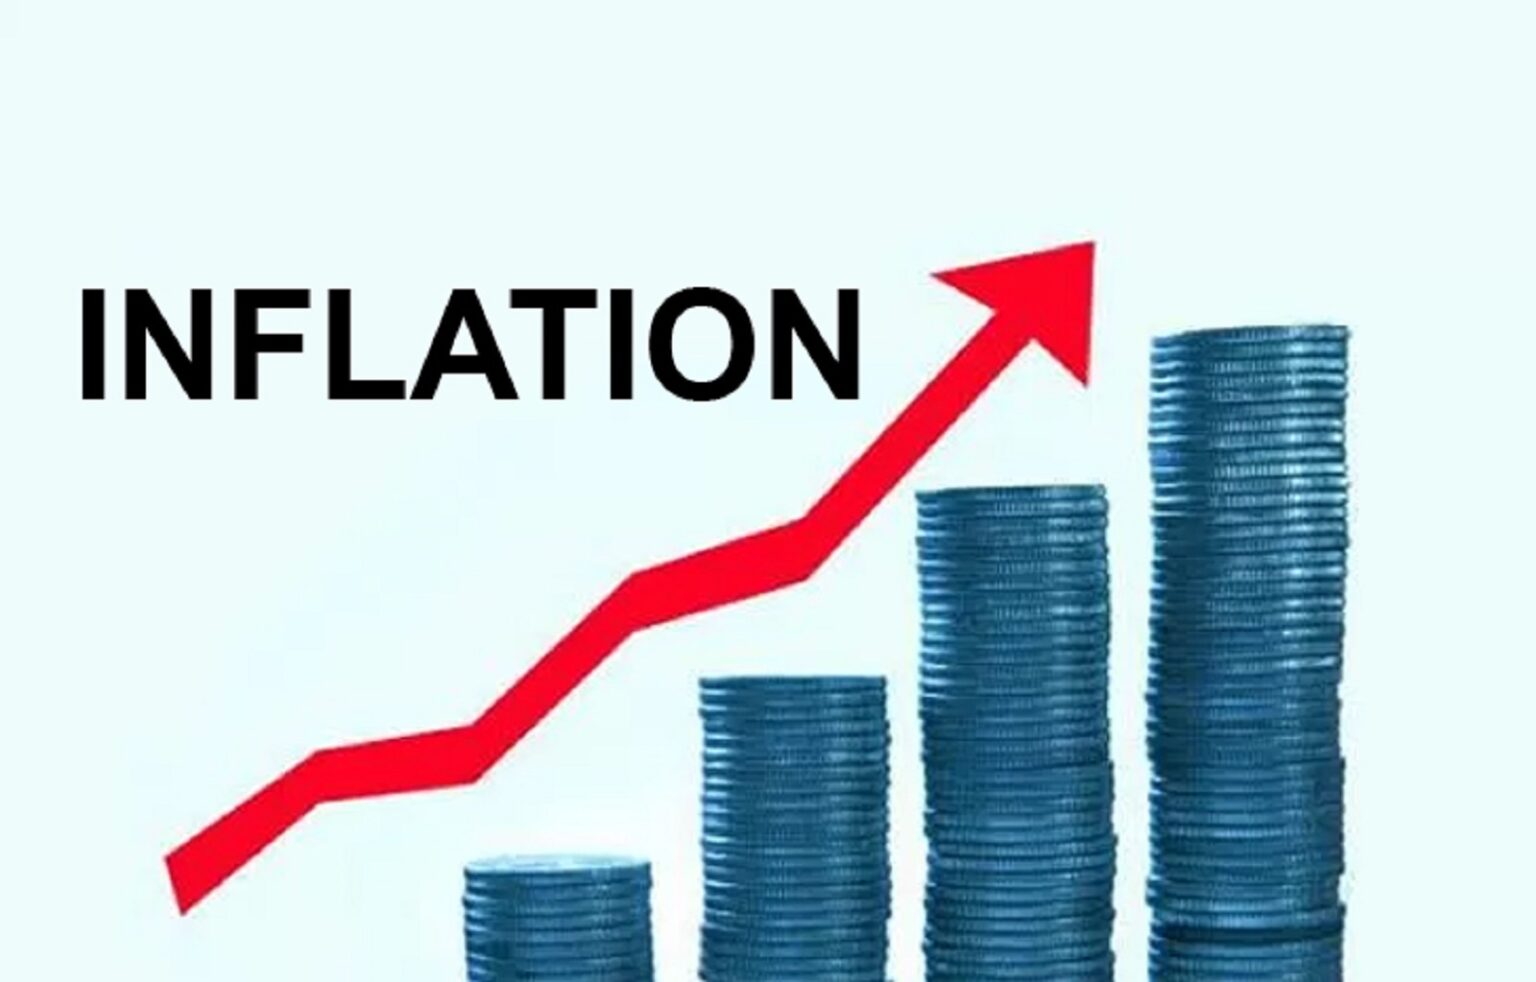 Nigeria’s inflation rises to 17.33, highest in 45 months NewsWireNGR